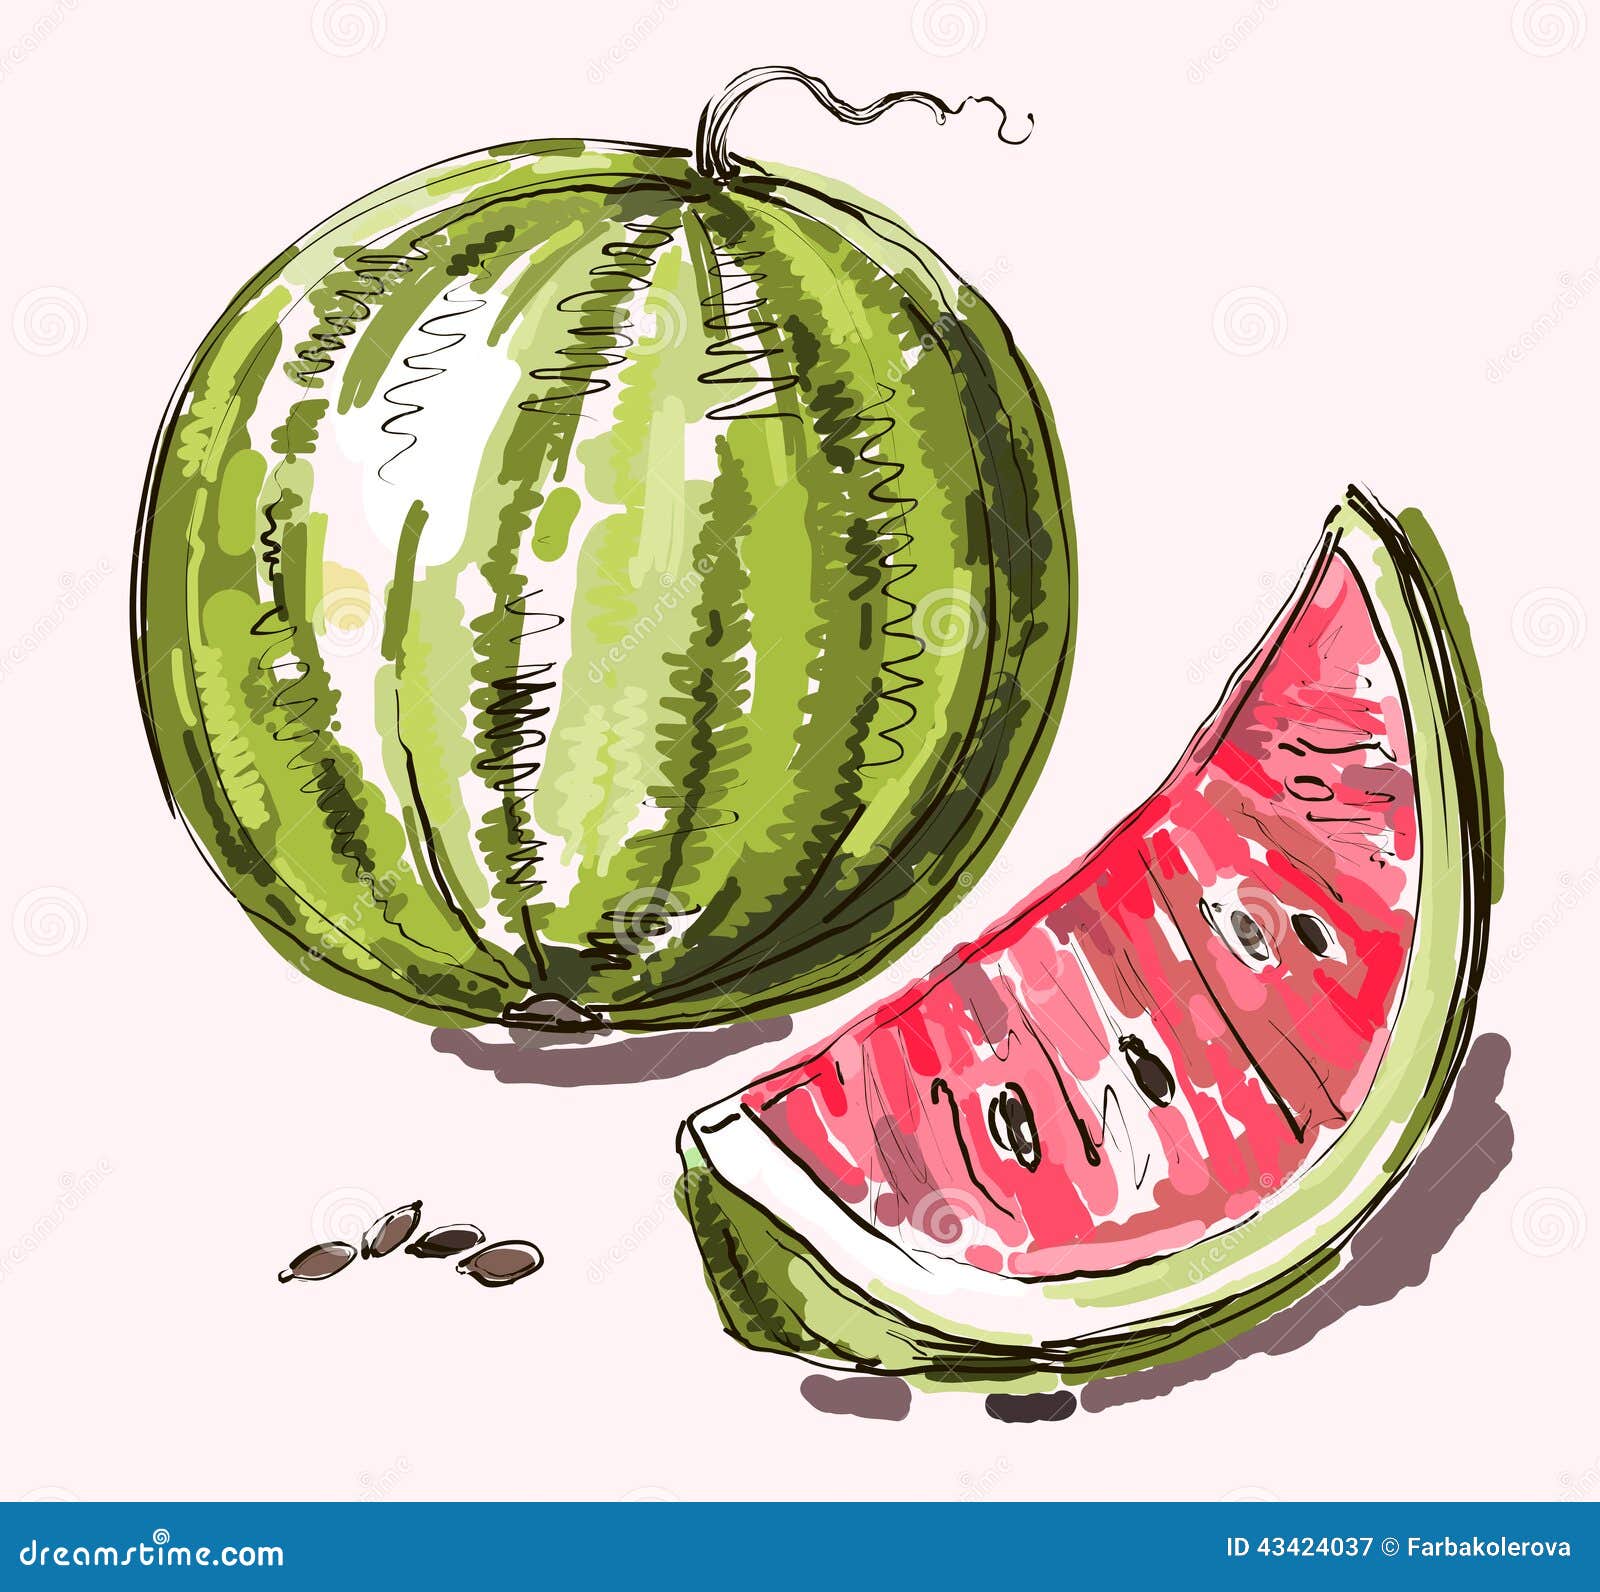 How to Draw a Watermelon Slice Step by Step - EasyLineDrawing